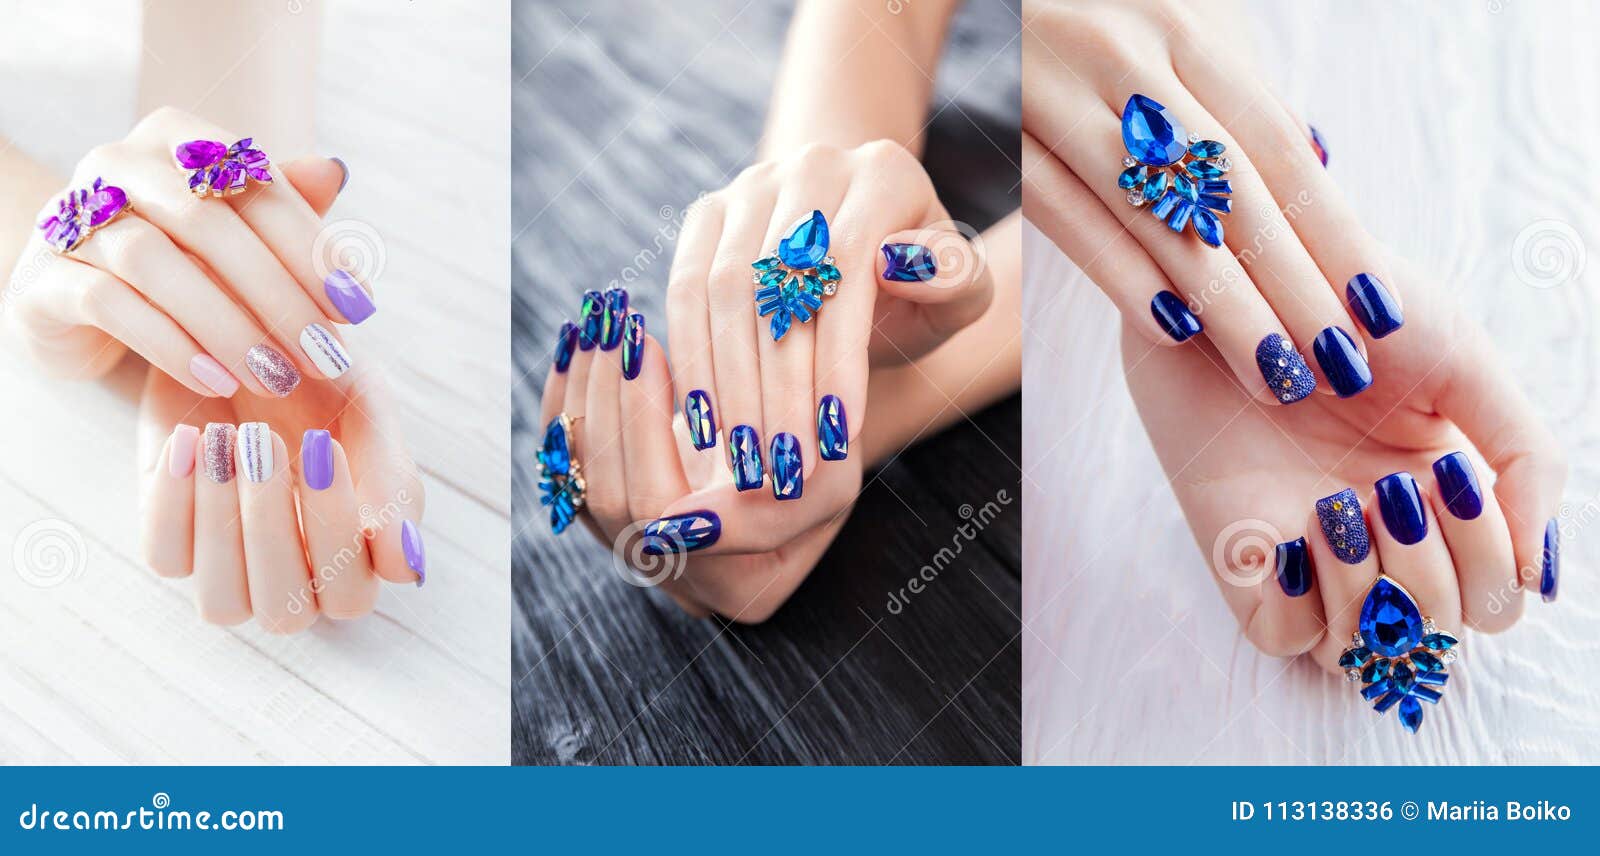 blue with some bling (water spotted nails) : r/NailArt